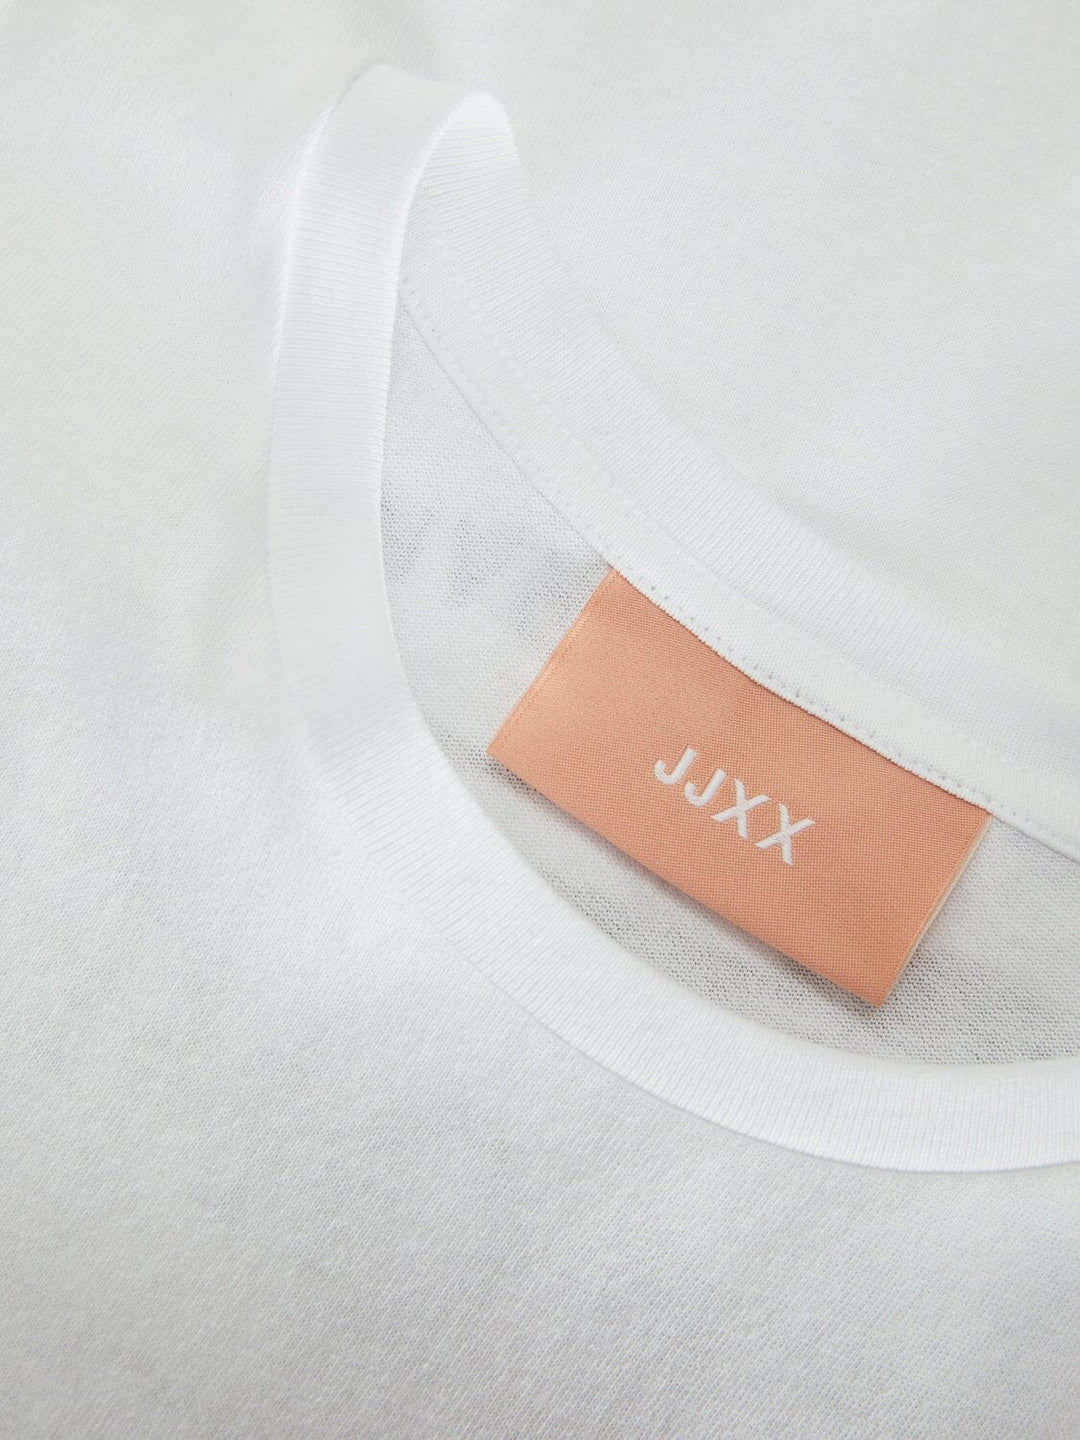 Jjxx - Jxmillow Loose Ss Tee Ft24 - 4708653 Bright White I Dare You To T-shirts 